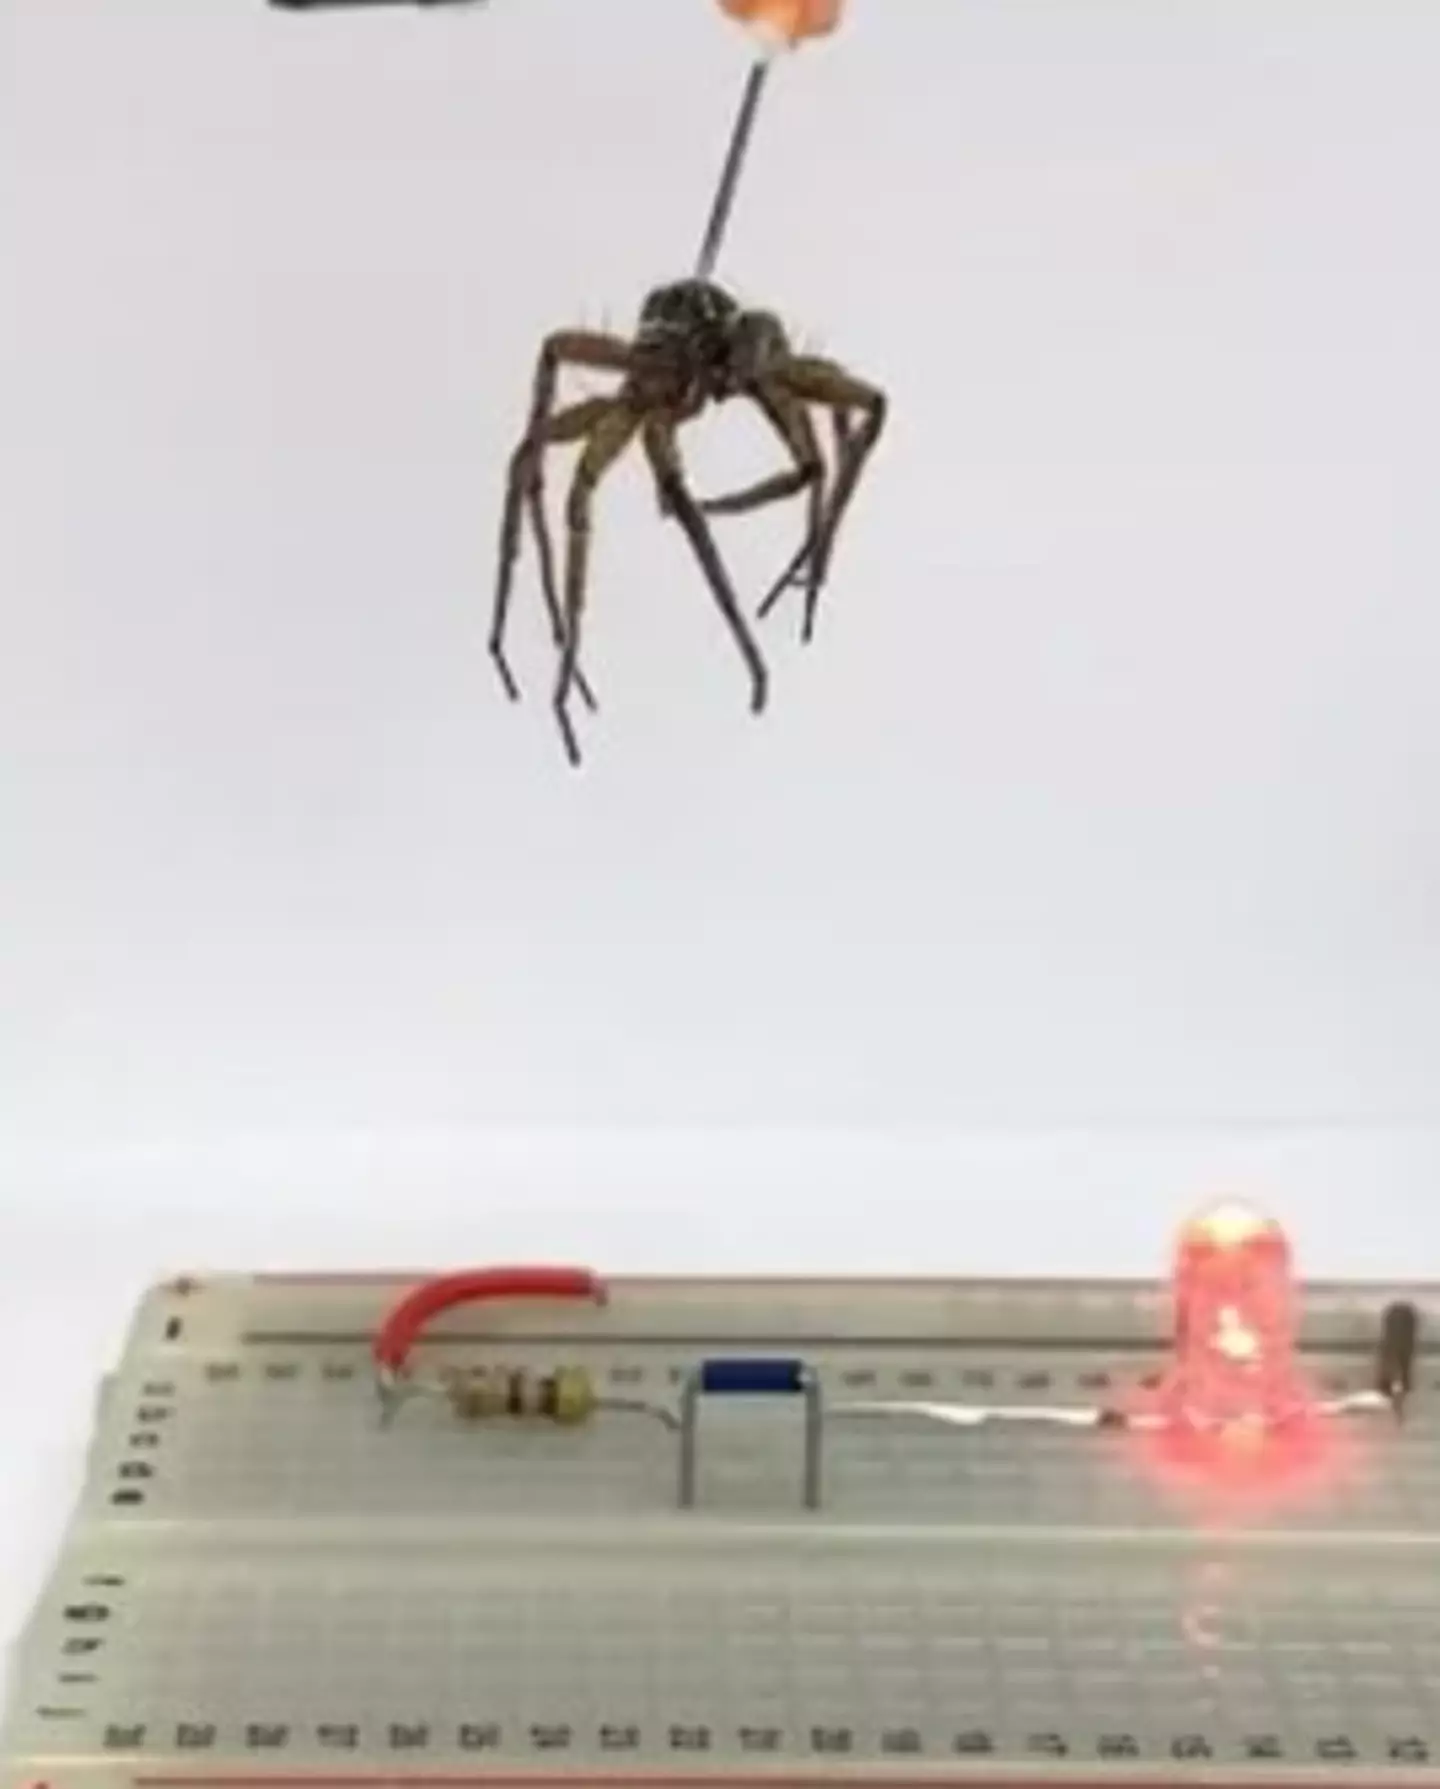 Researchers have turned dead wolf spiders into ‘necrobotics’.